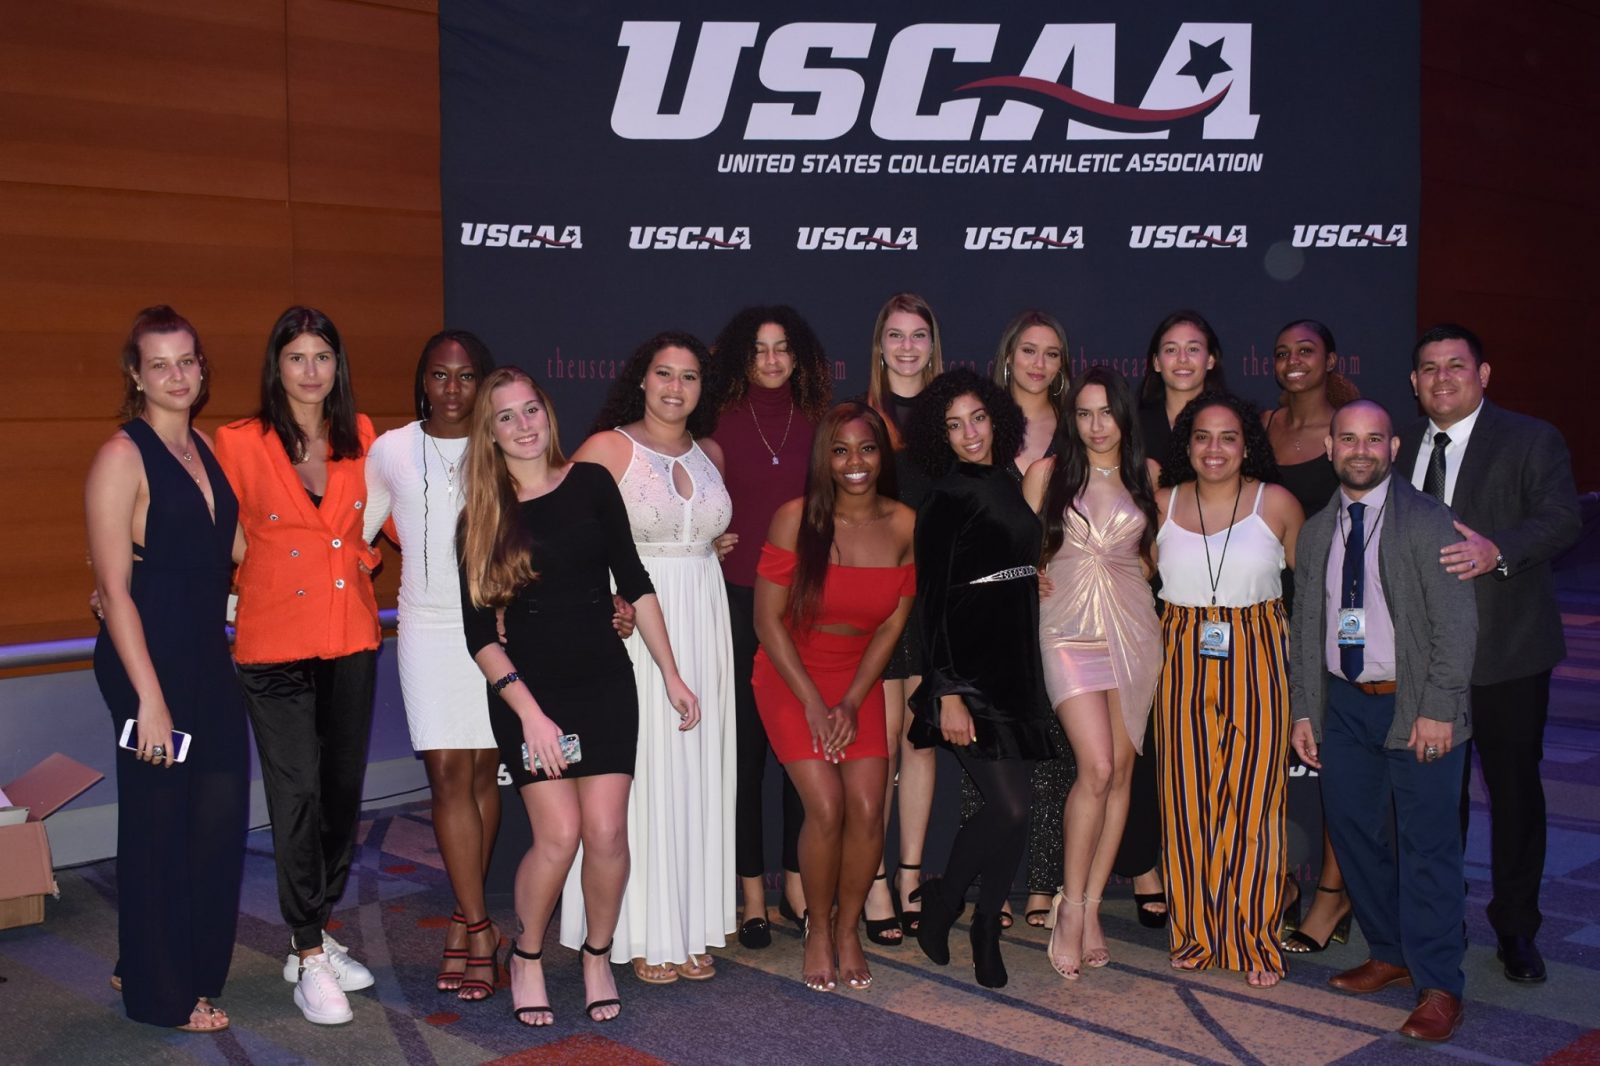 Women's Volleyball team at the USCAA Annual Banquet 2